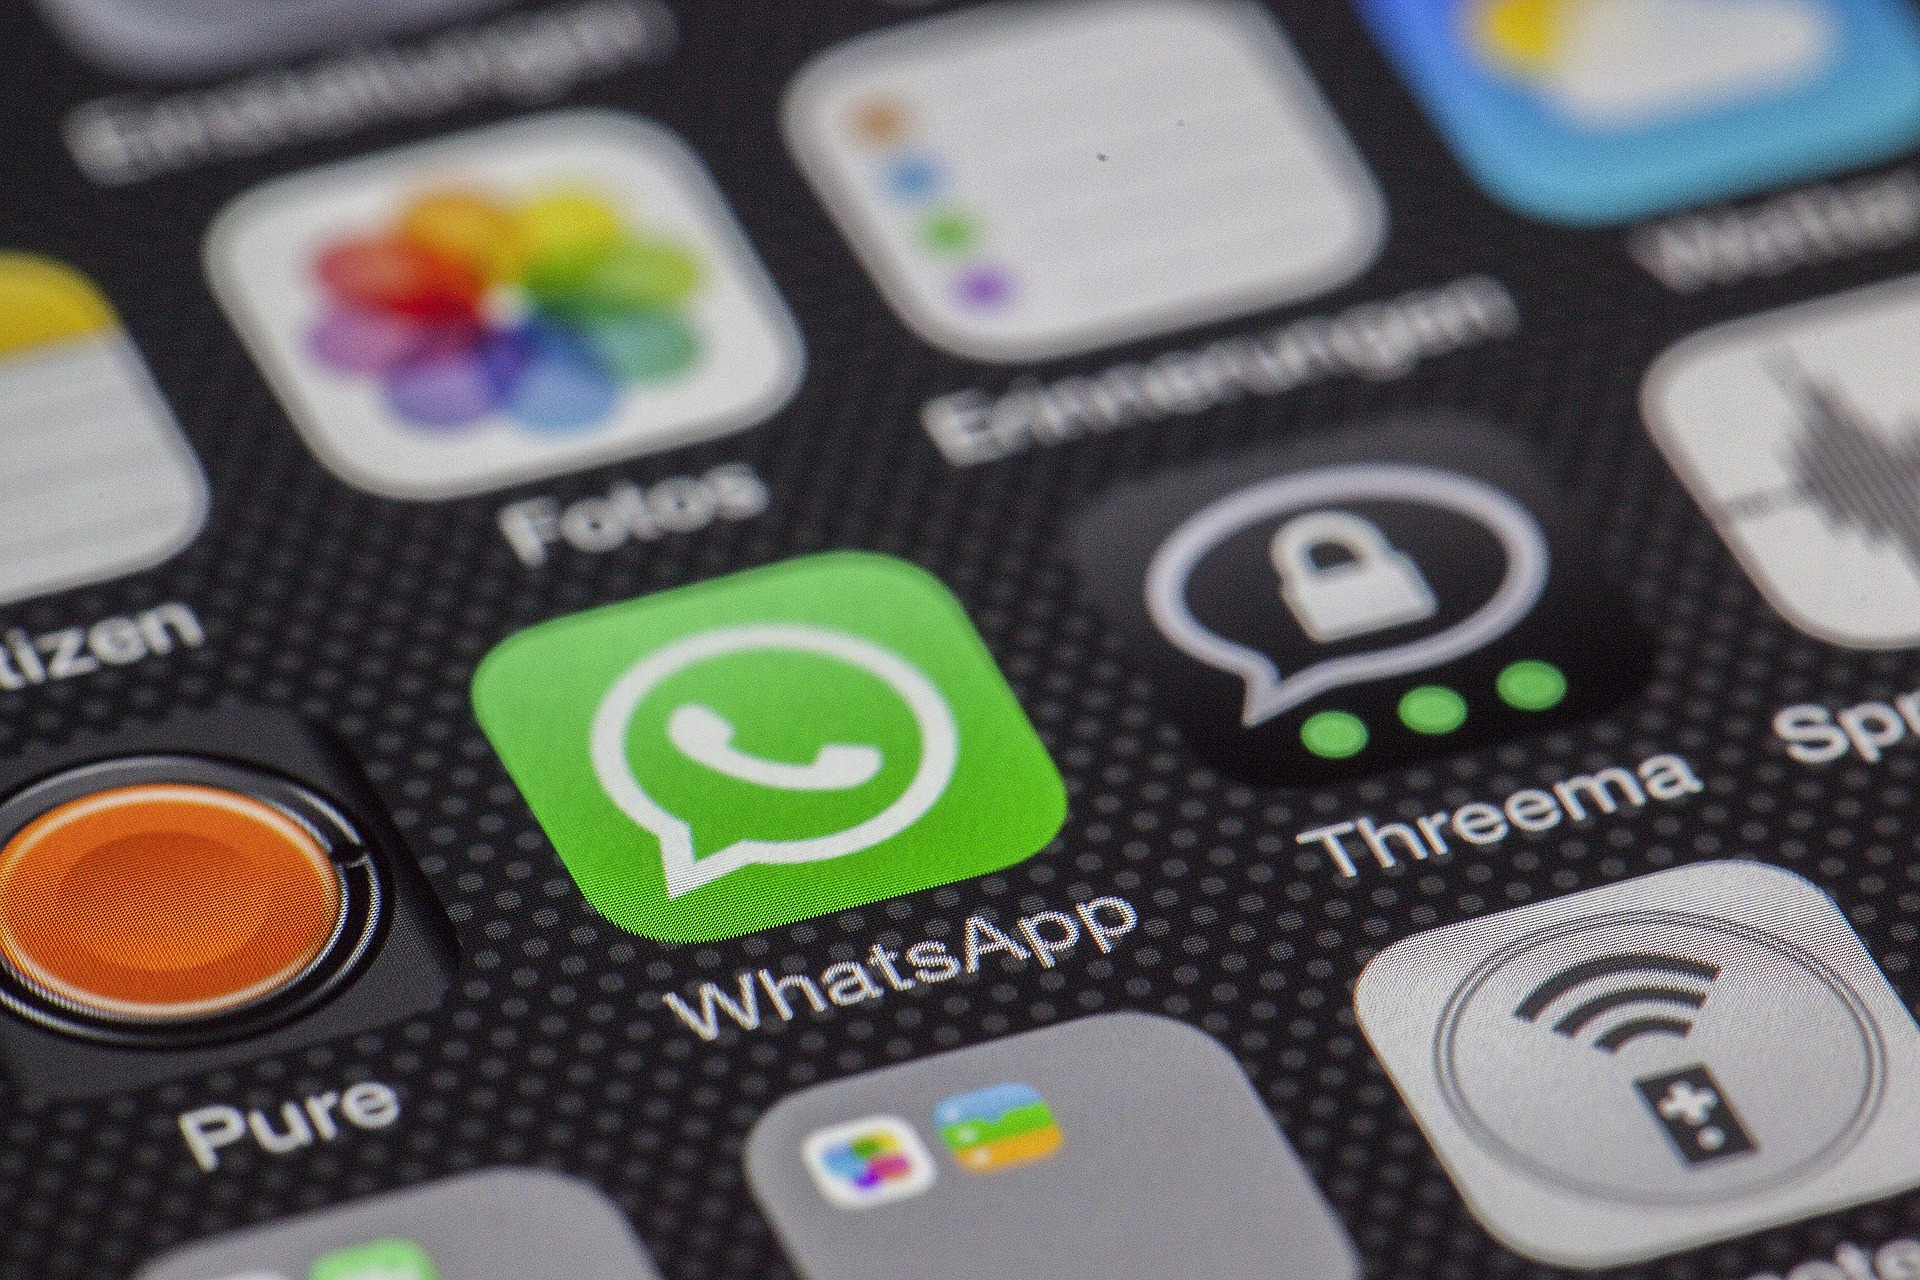 Man gets ten years in jail after WhatsApp threats to teenage boy leads to his suicide in Spain's Valencia area|